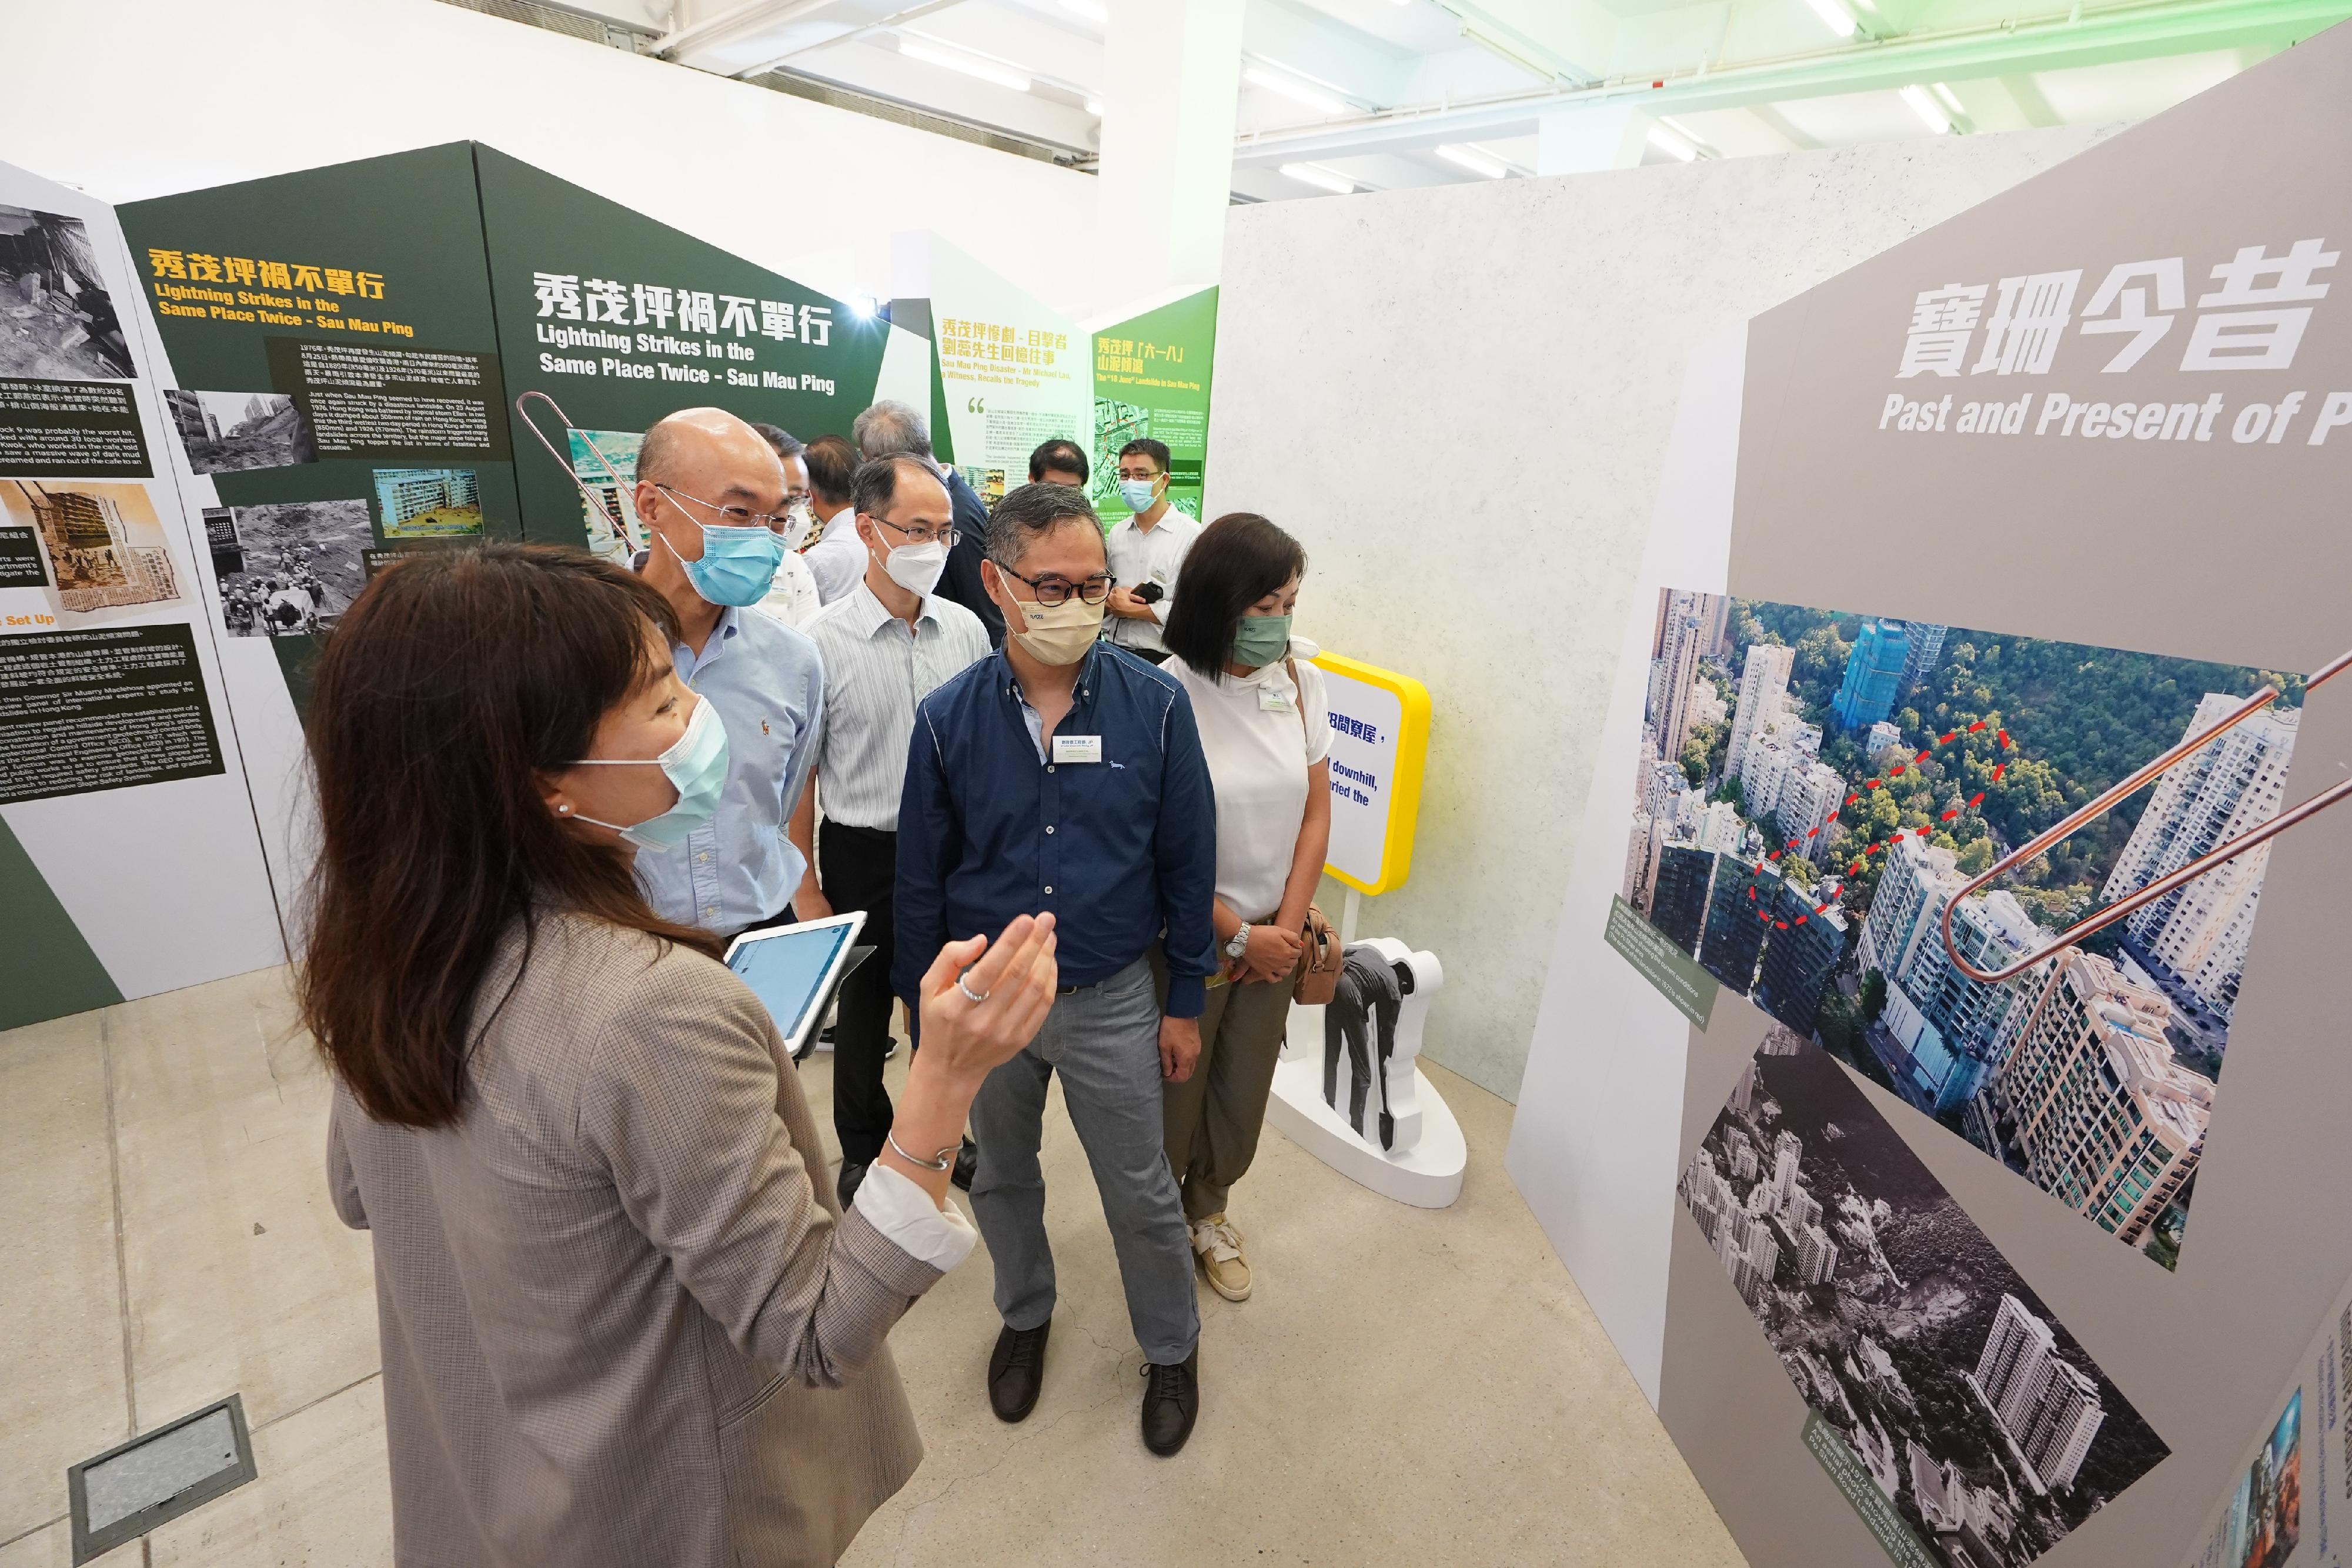 The Geotechnical Engineering Office of the Civil Engineering and Development Department holds a thematic exhibition on the commemorative campaign Remembrance and Reflection: 50 years after the Tragic Landslides on 18 June 1972 at Tai Kwun from today (June 3) until June 6. Photo shows the Permanent Secretary for Development (Works), Mr Ricky Lau (fourth left), and the Director of Civil Engineering and Development, Mr Michael Fong (second left), touring the exhibition.